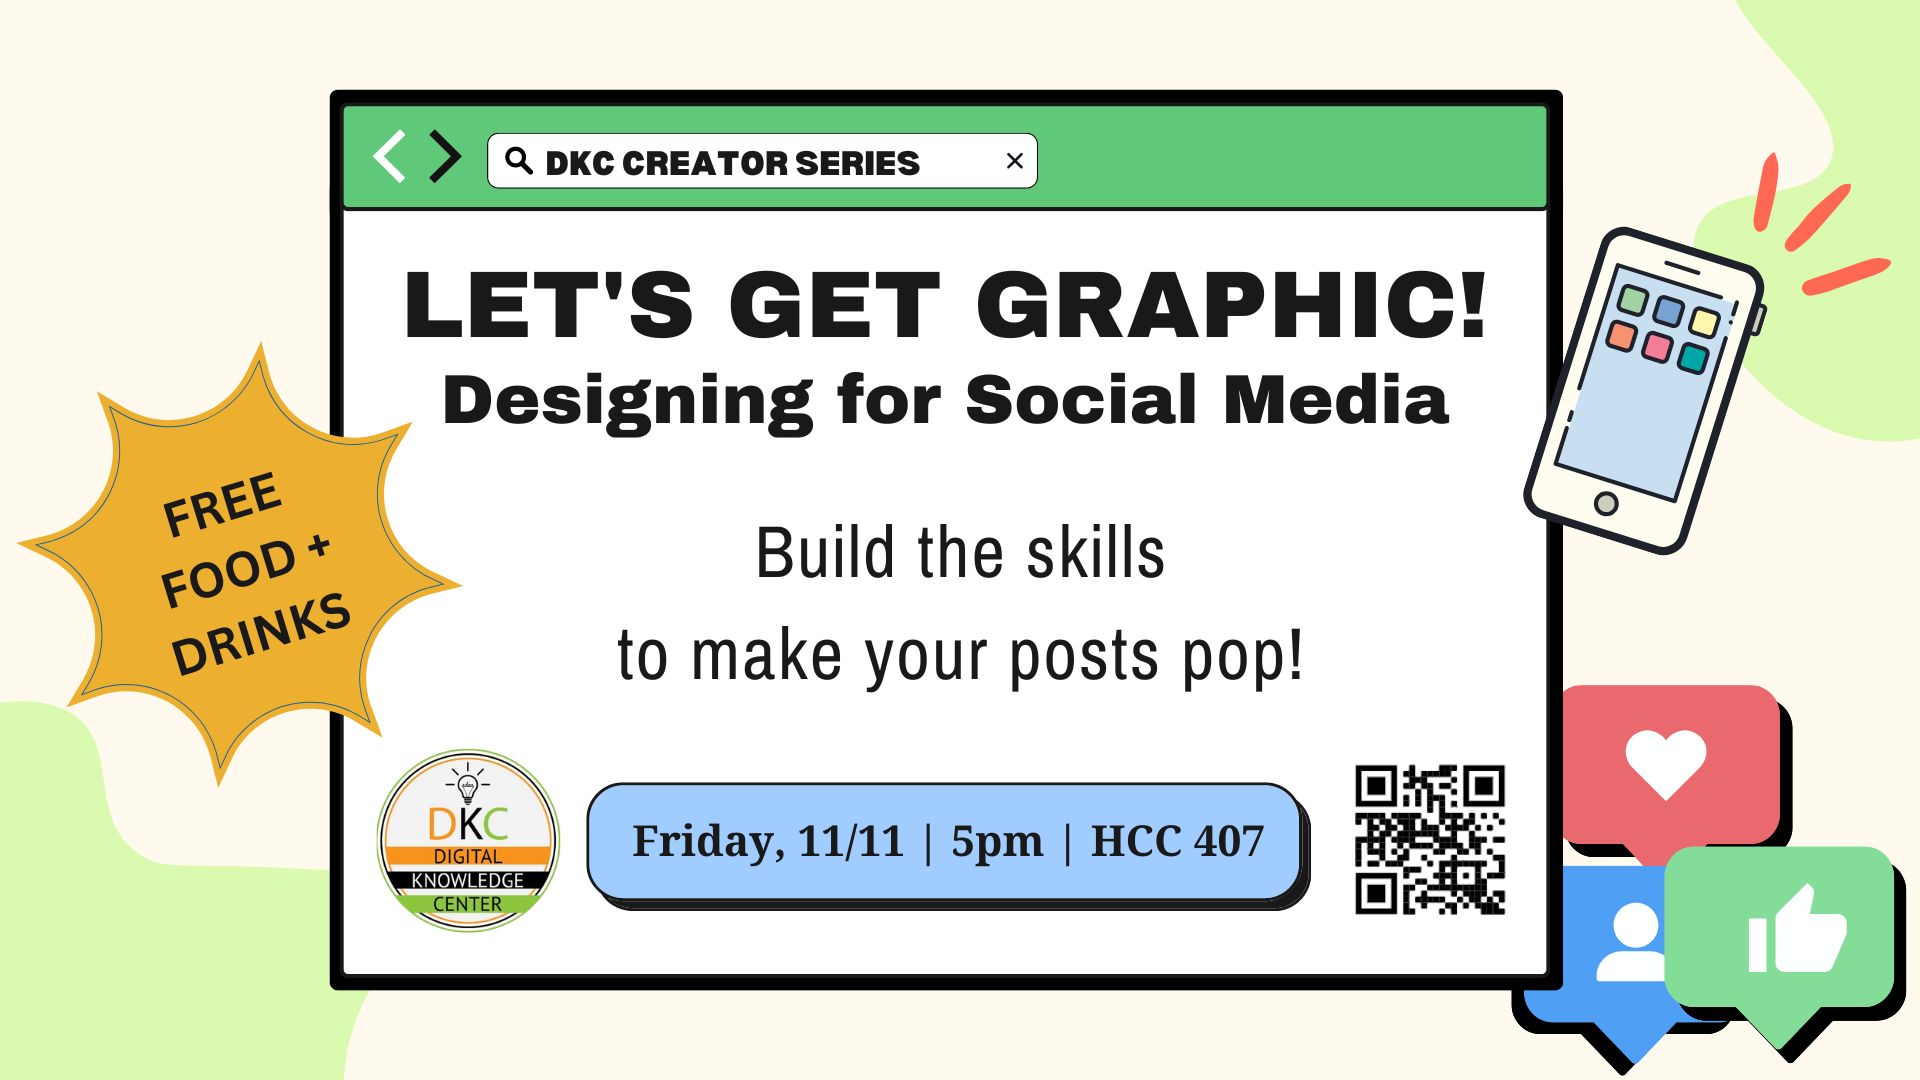 Let's get graphic! Designing for social media. Friday, 11/11 at 5pm in HCC 407